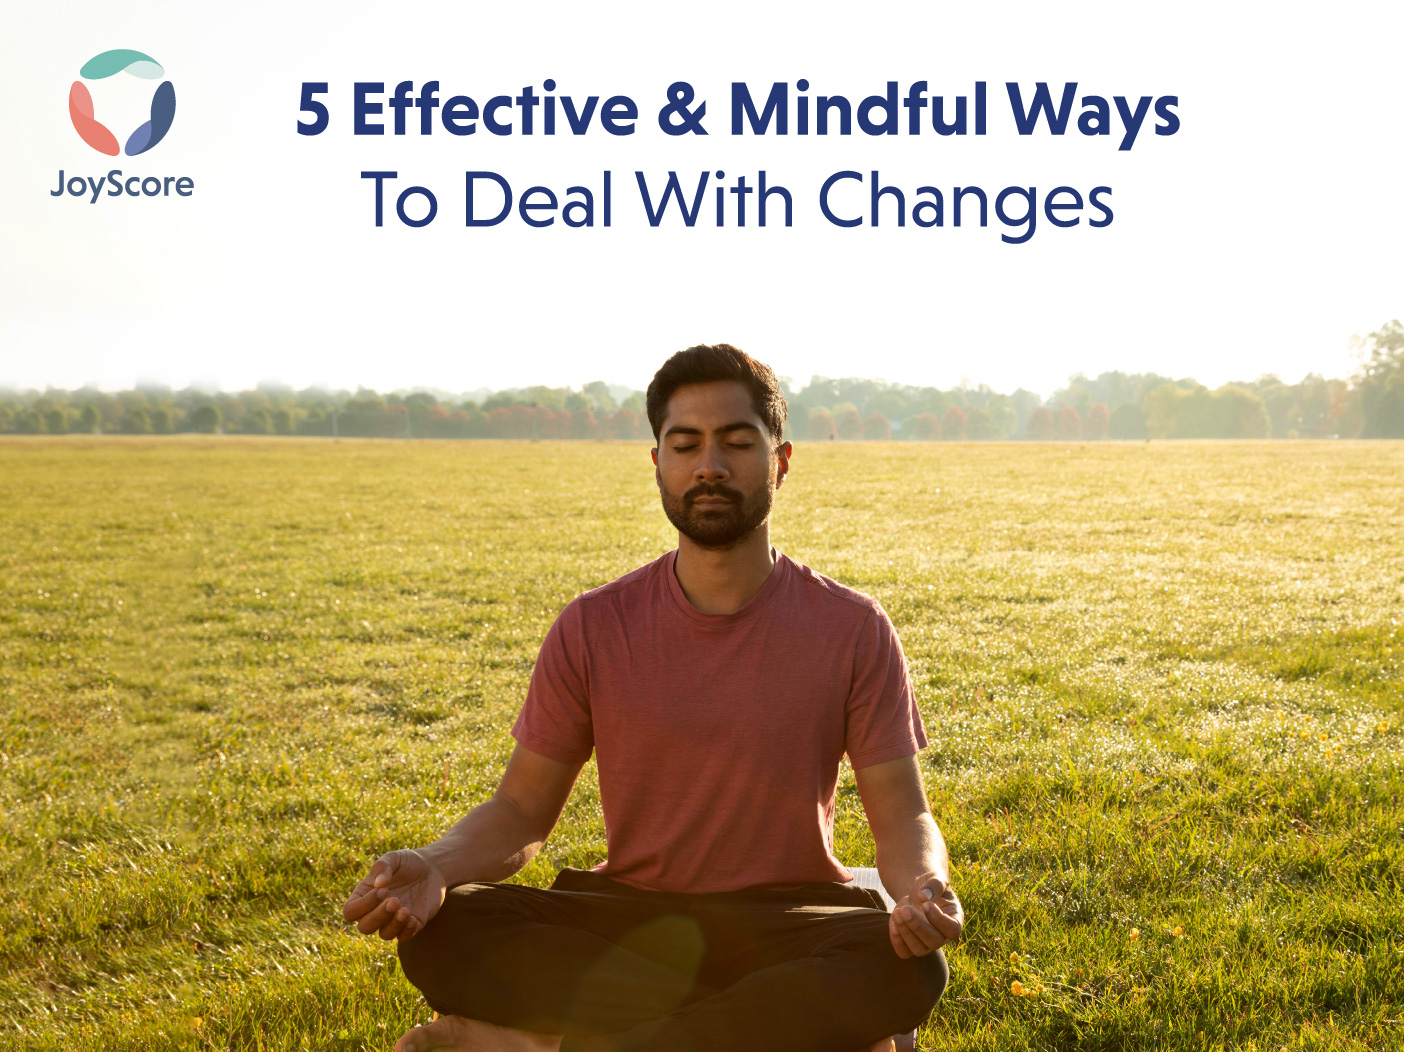 Dealing with Change through Mindfulness, 5 Effective Ways